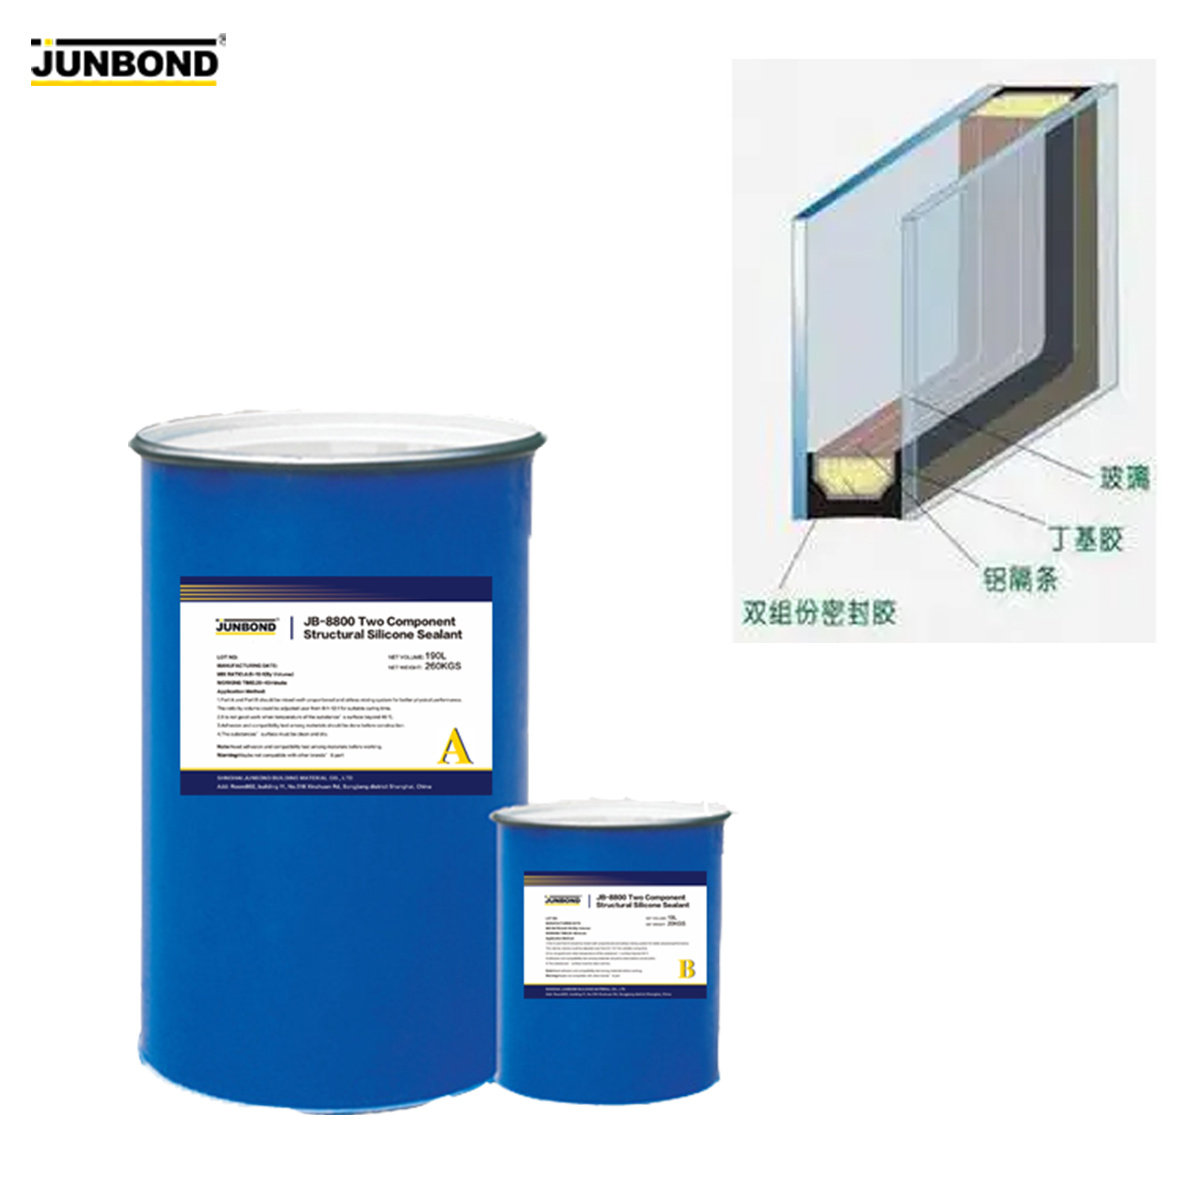 
                Two-Component Ultraviolet Resistant Insulating Glass RTV Silicone Sealant
         